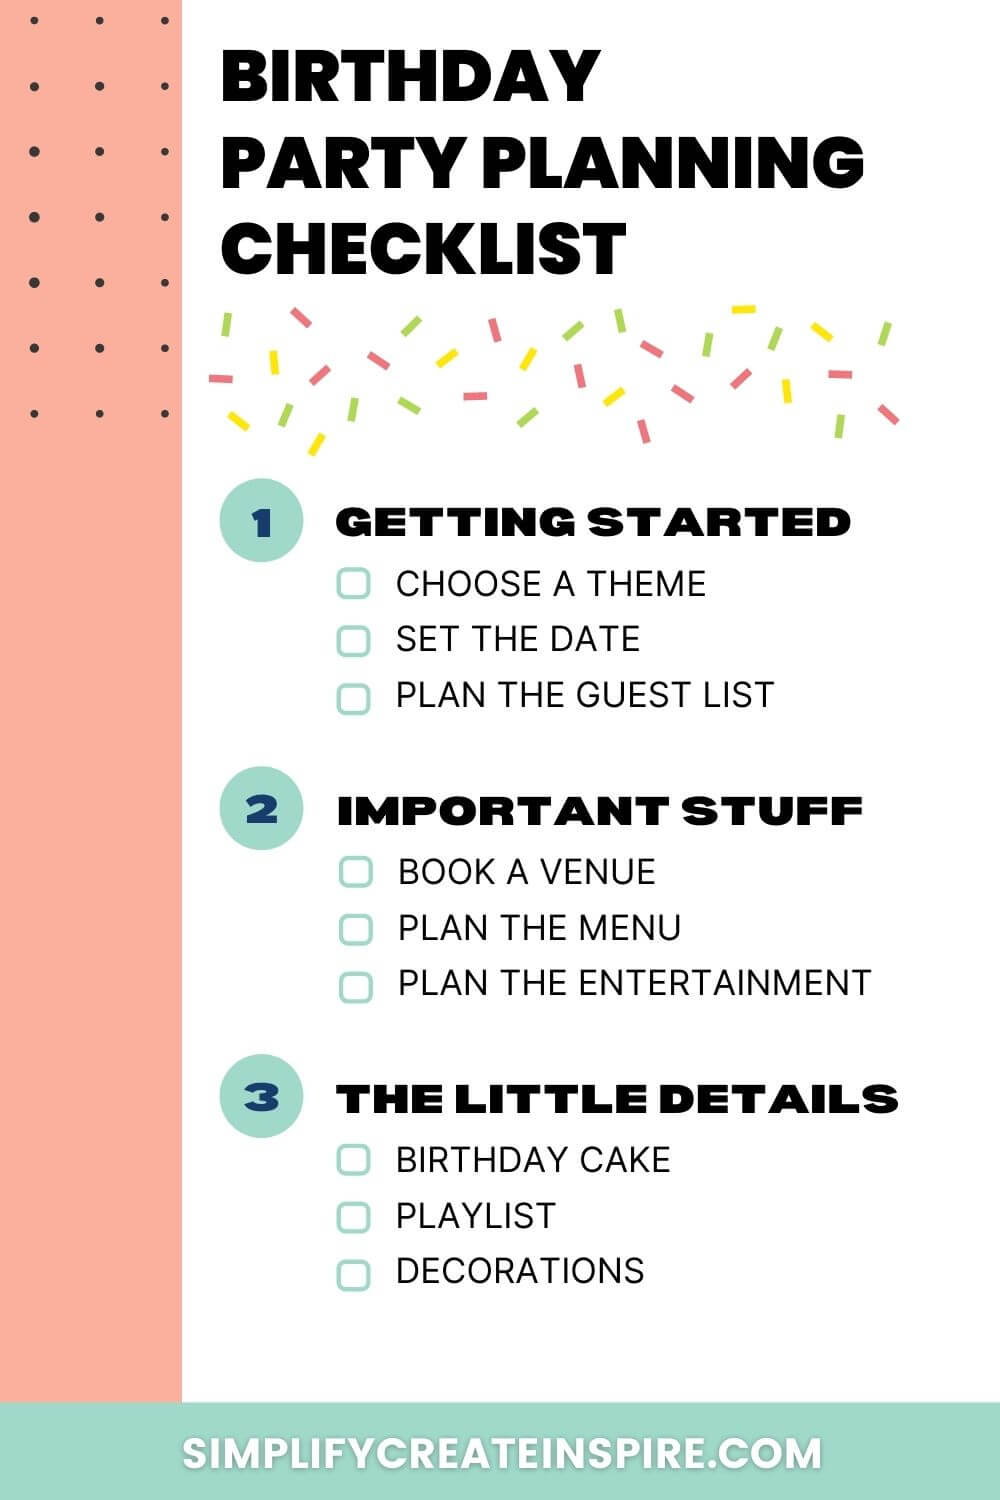 How To Plan A Birthday Party For Adults: The Ultimate Party Planning Guide